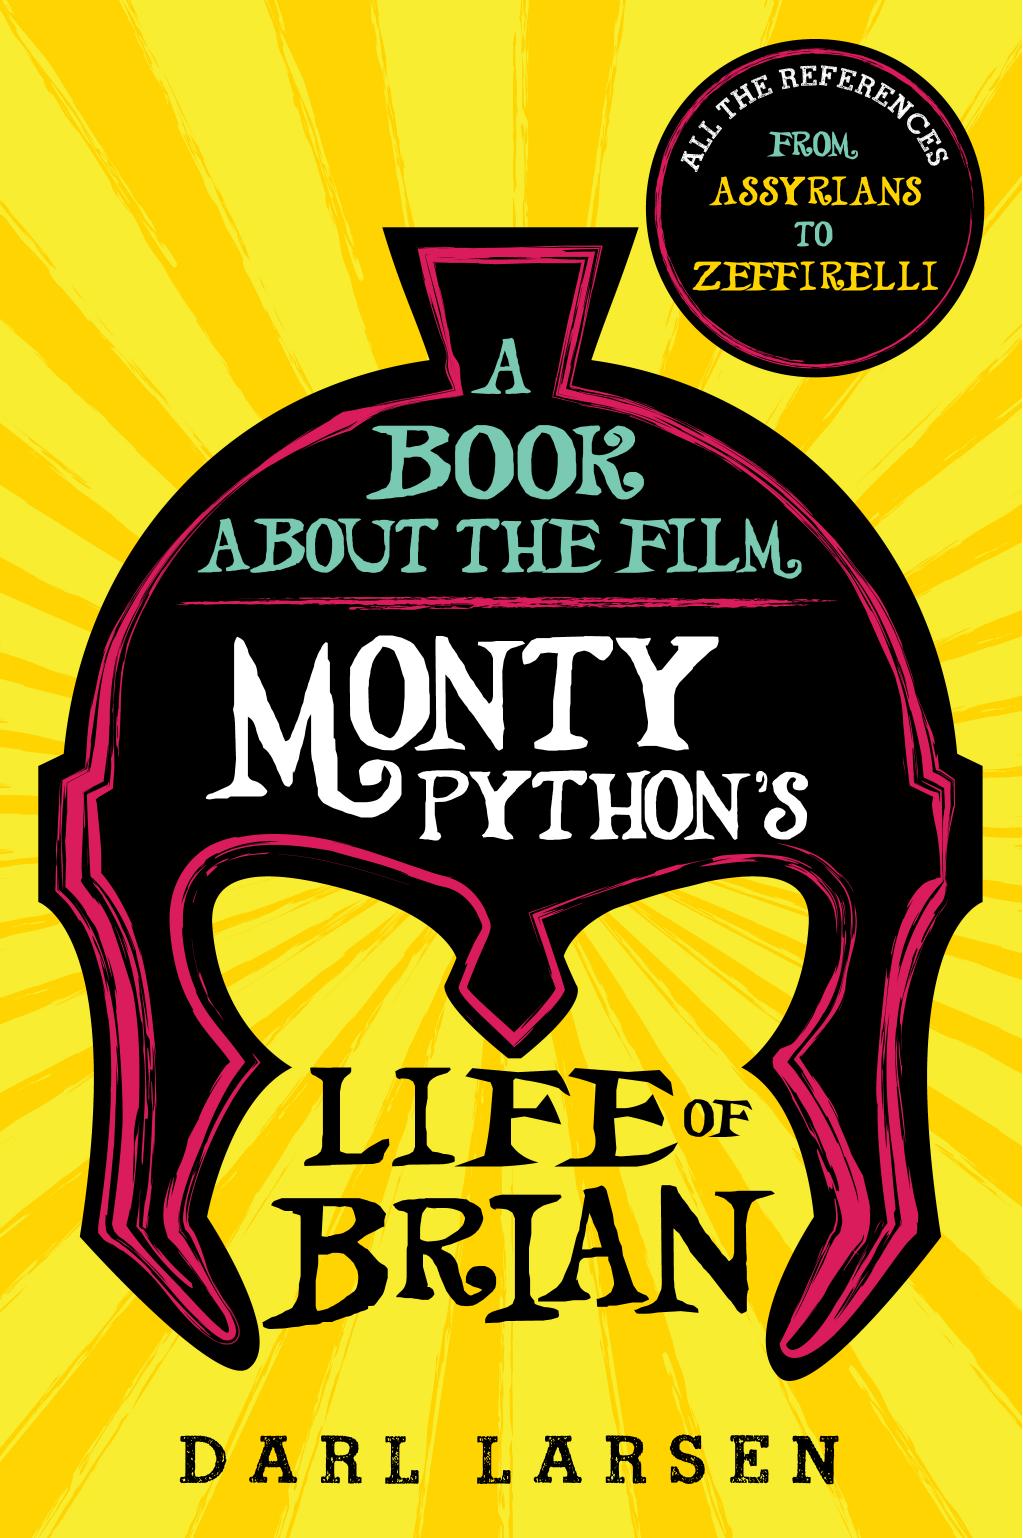 A Book about the Film Monty Python's Life of Brian by Darl Larsen